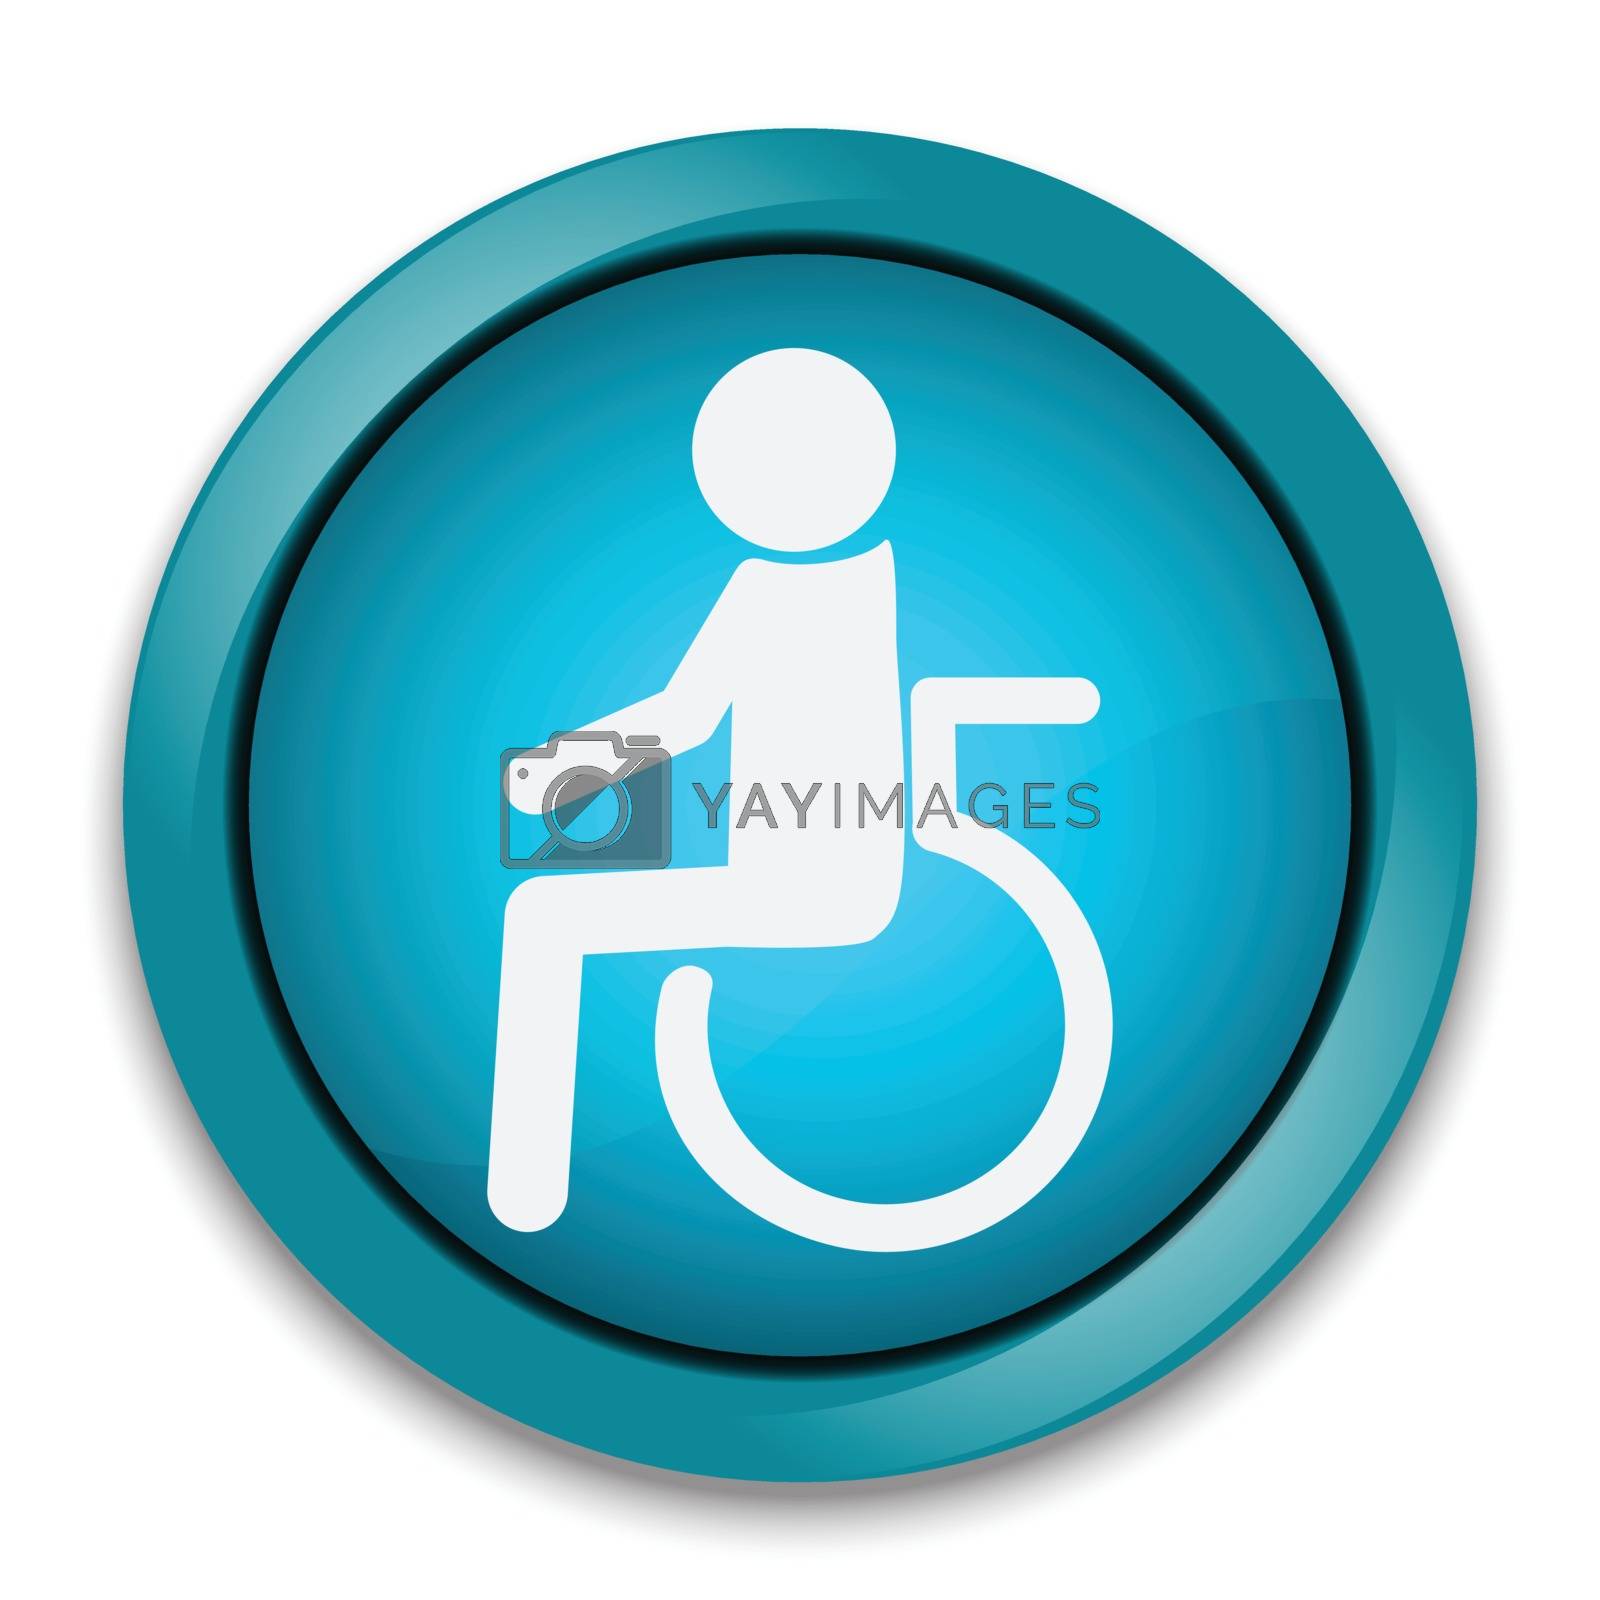 Royalty free image of Disabled icon, medical button by Kheat